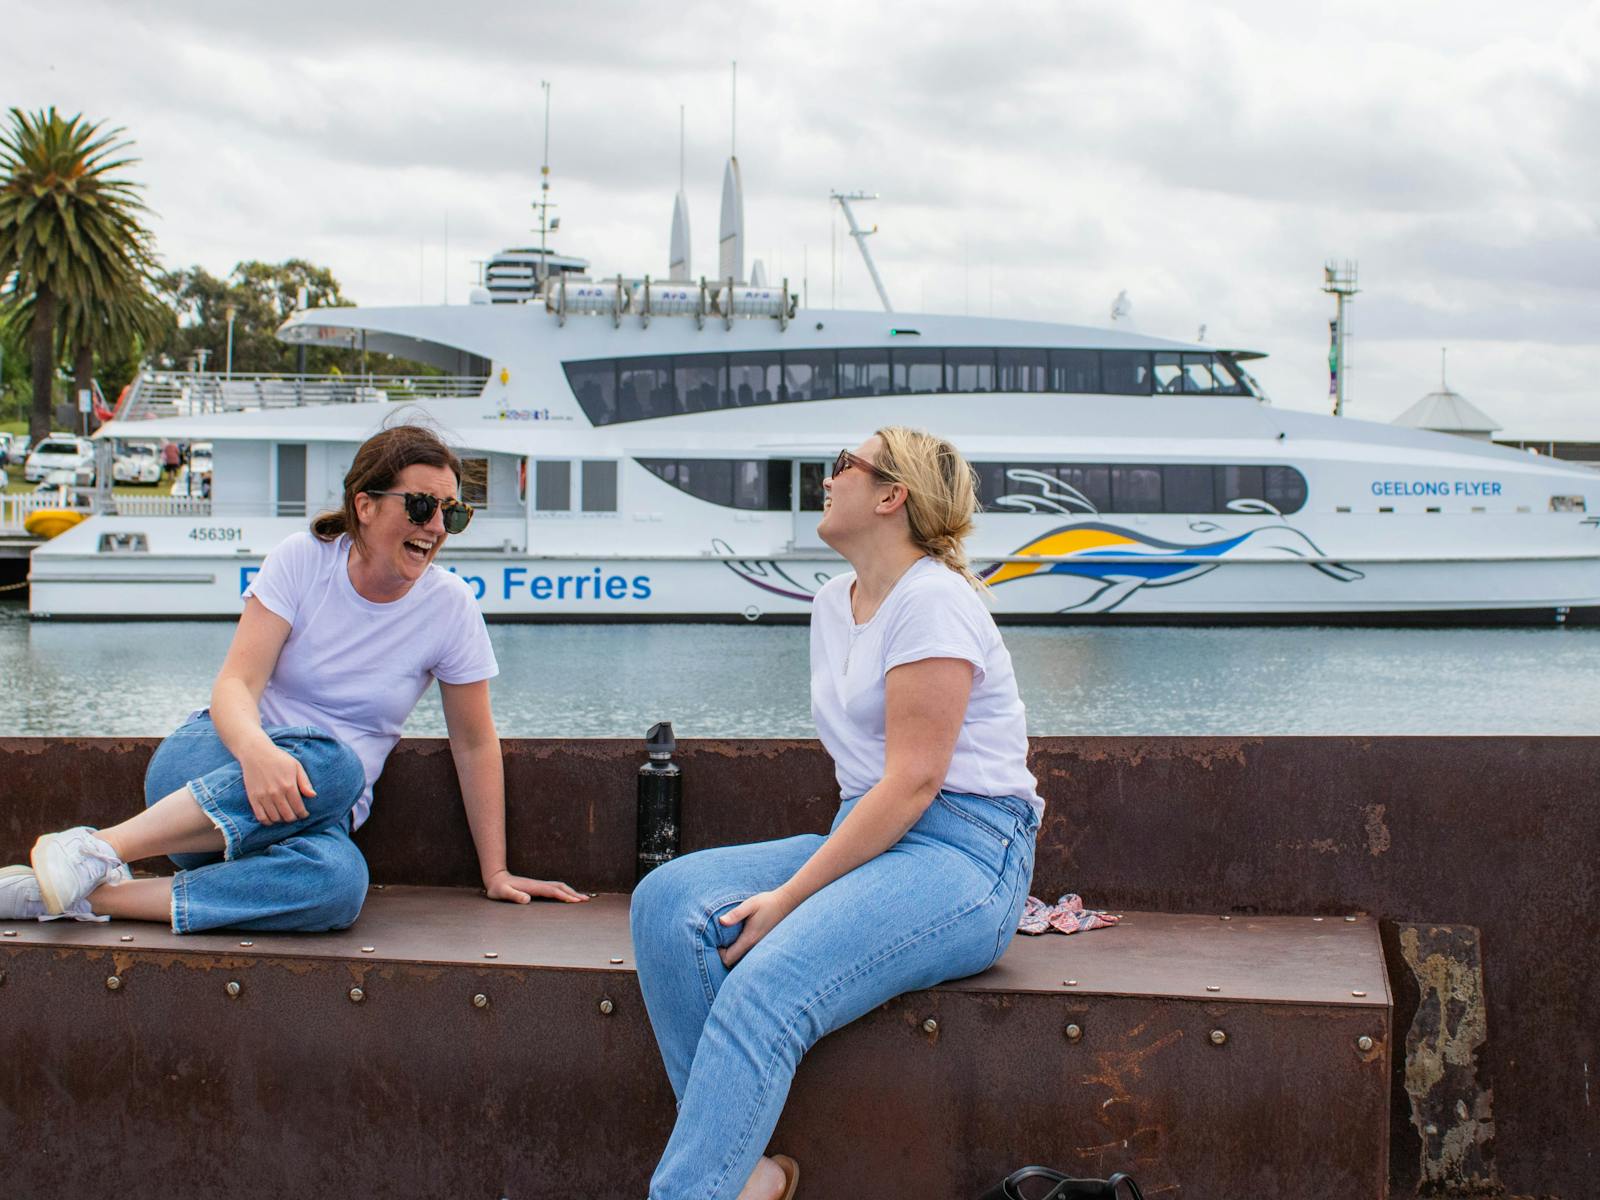 Passengers enjoying Geelong’s waterfront with ferry Geelong Flyer in the background